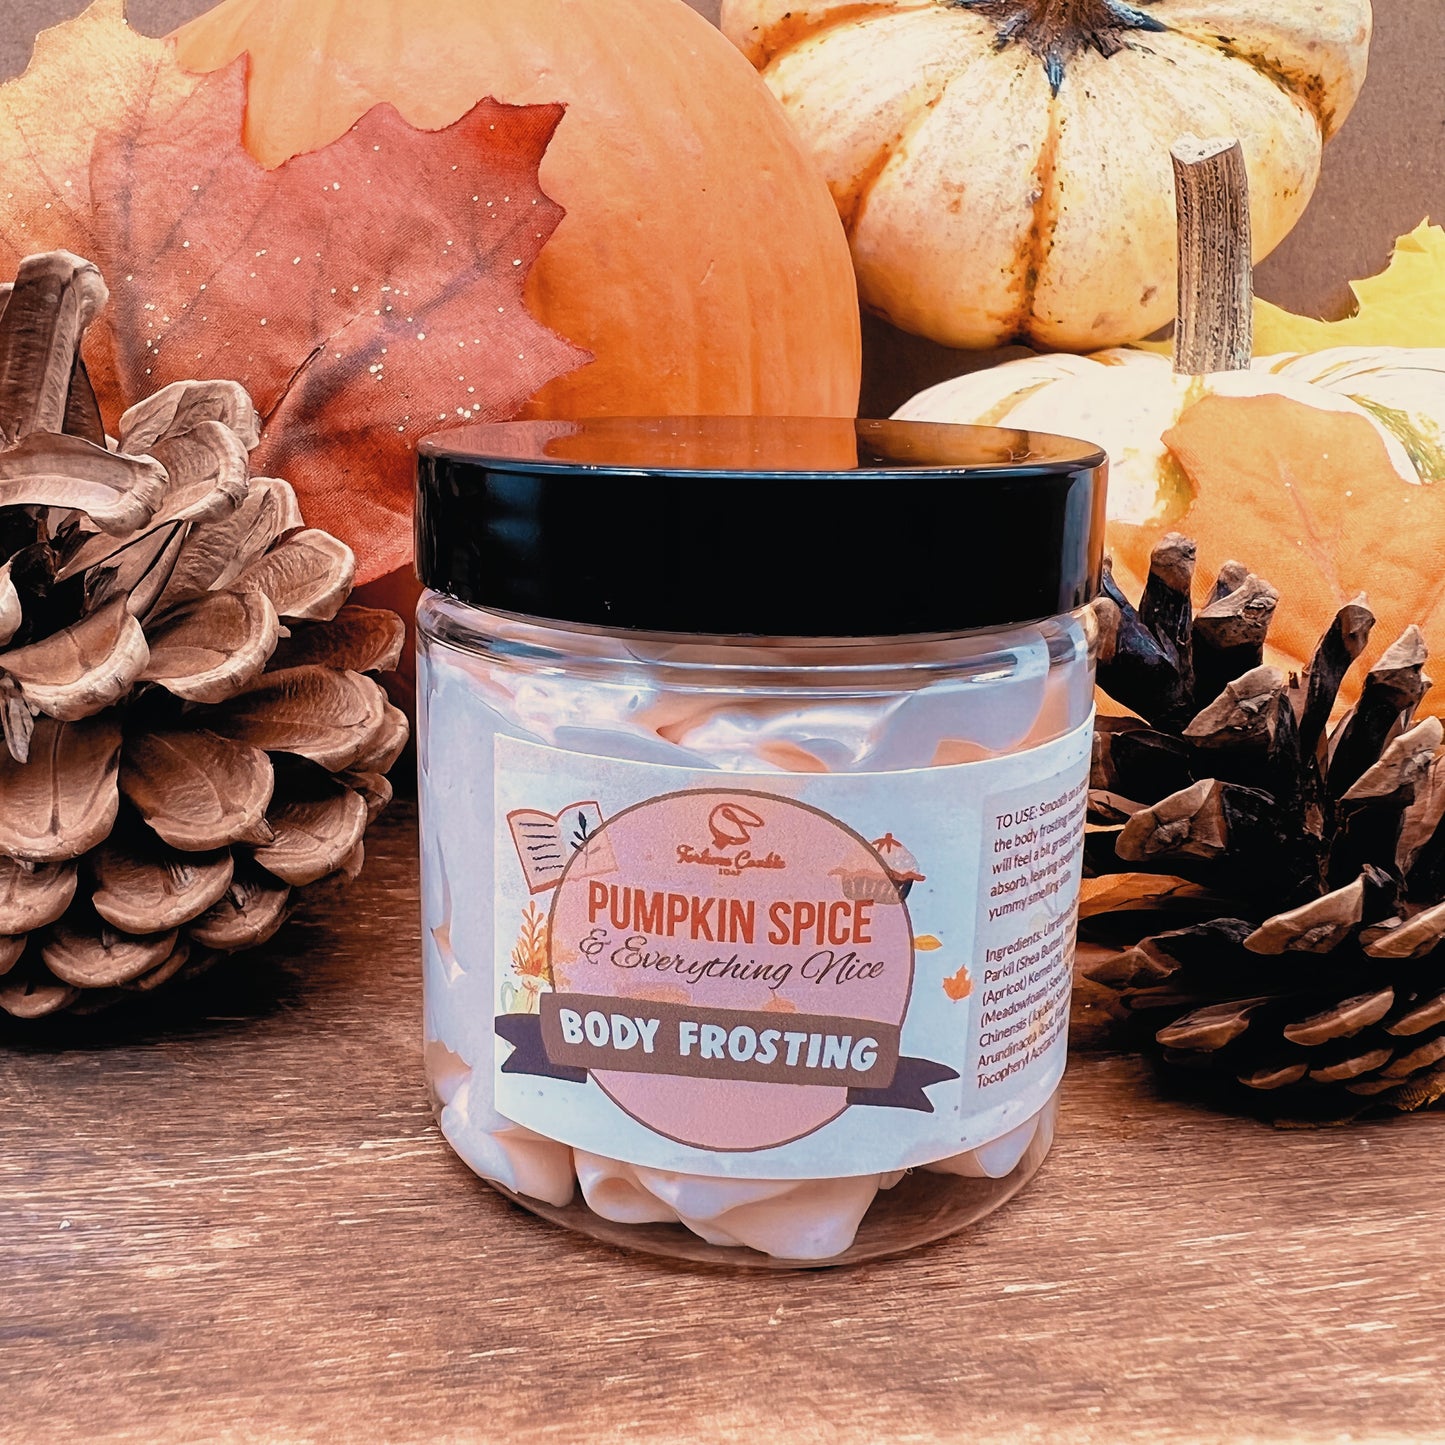 PUMPKIN SPICE (& EVERYTHING NICE) Body Frosting